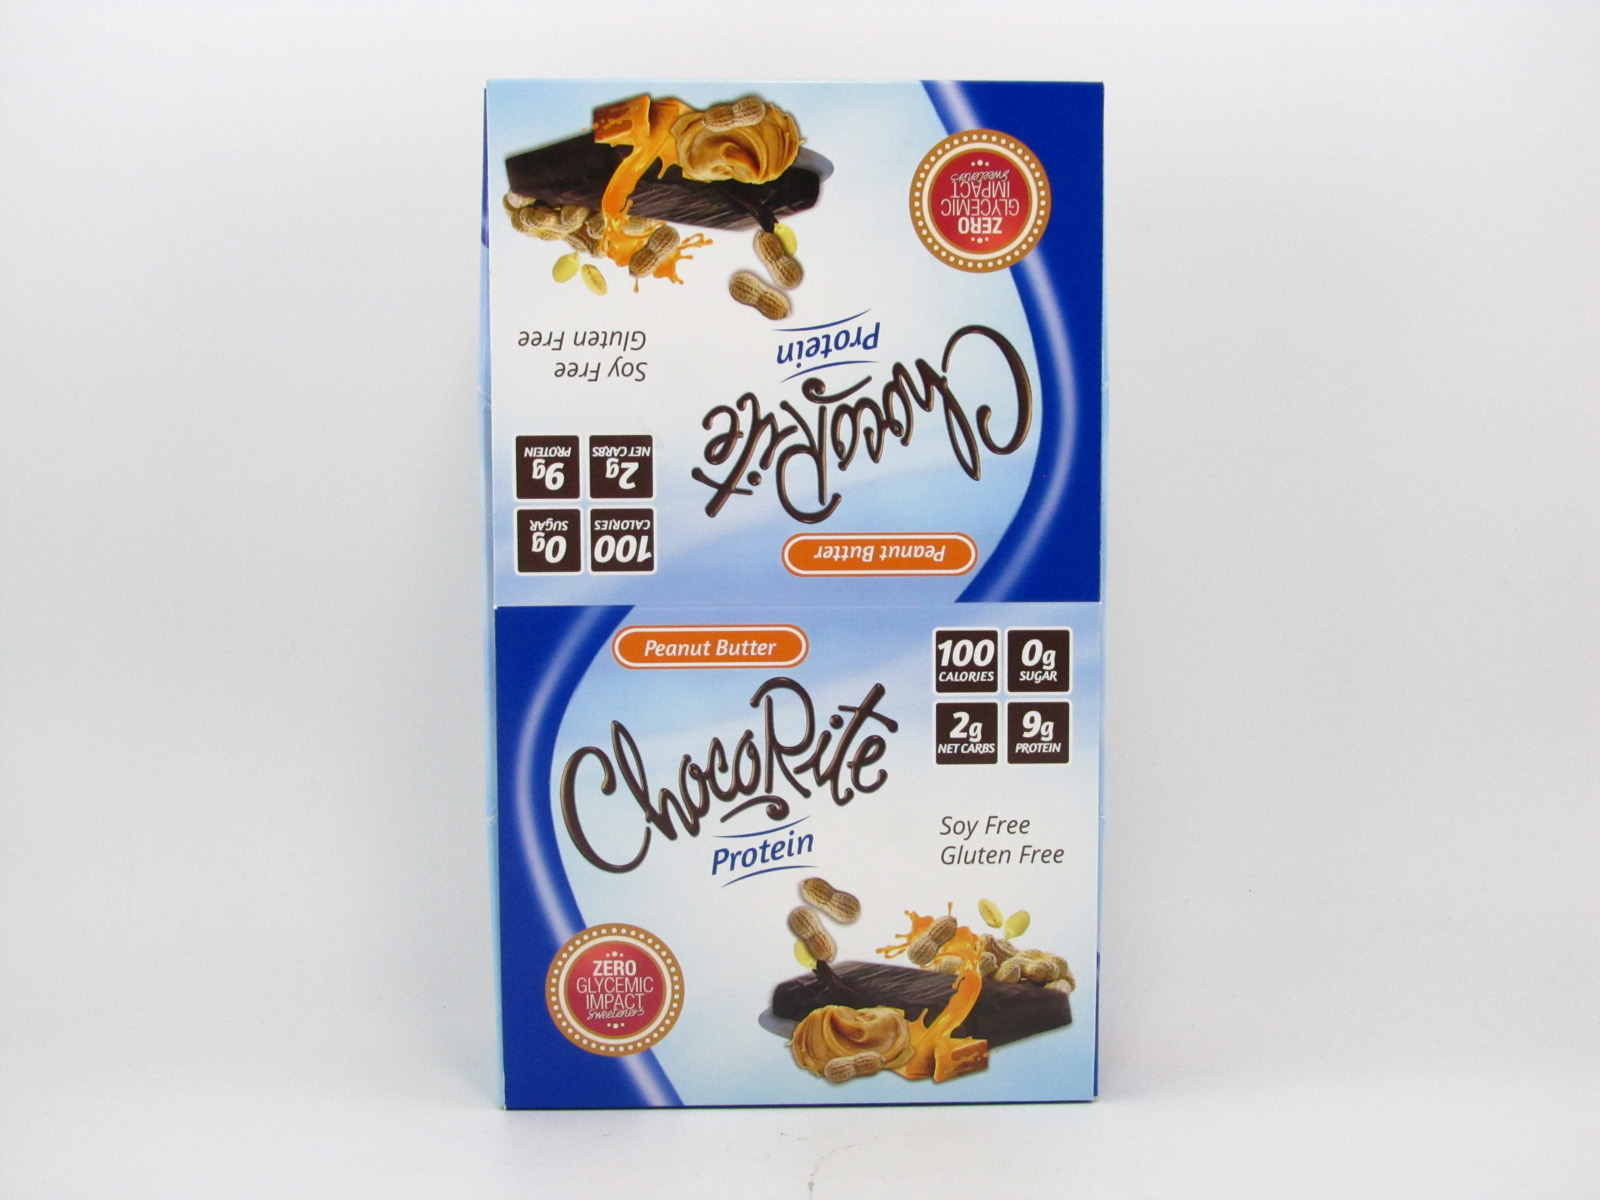 Chocorite Protein Bar ( 34g) - Peanut Butter Box of 16 - front view